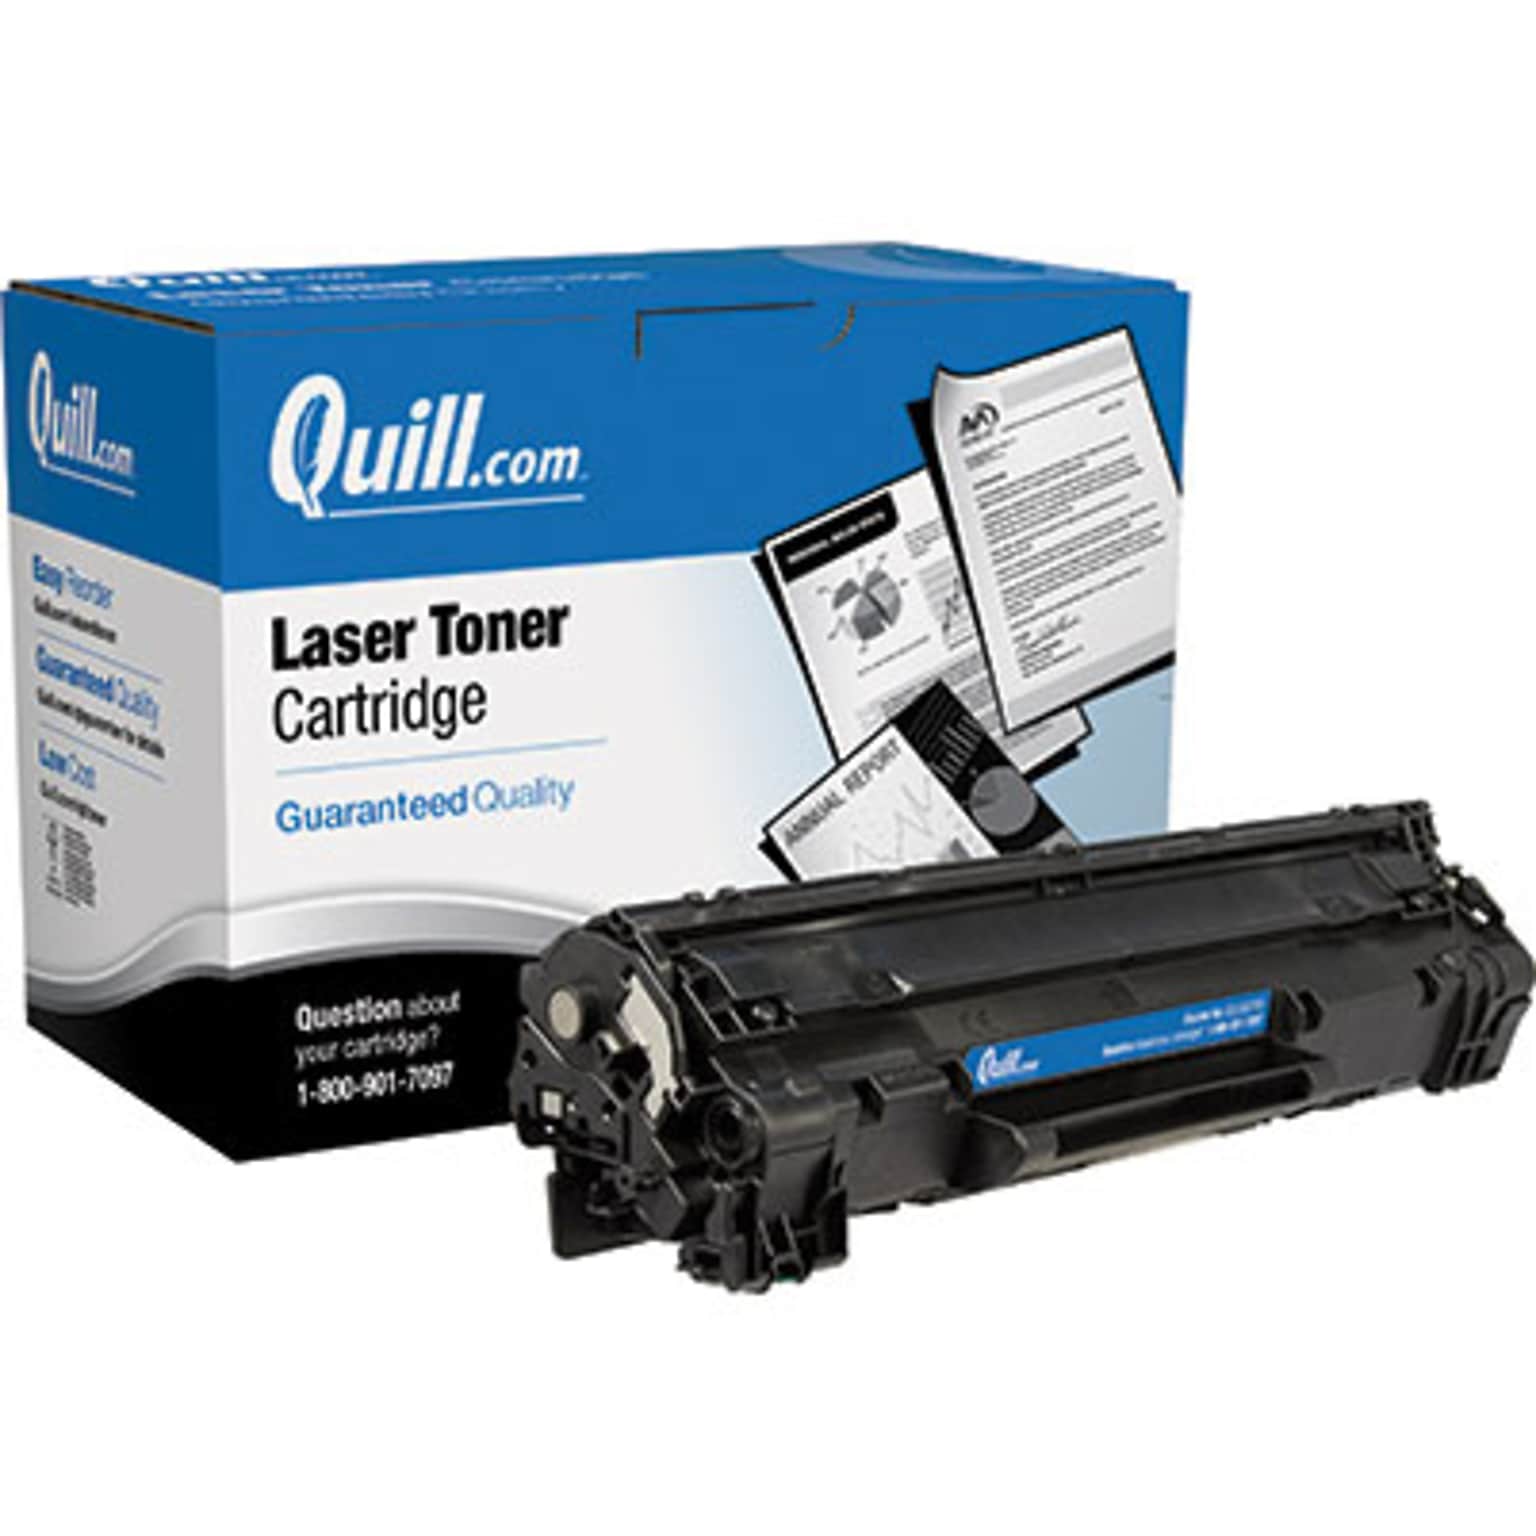 Quill Brand Remanufactured HP 85A (CE285A) Black Laser Toner Cartridge (100% Satisfaction Guaranteed)